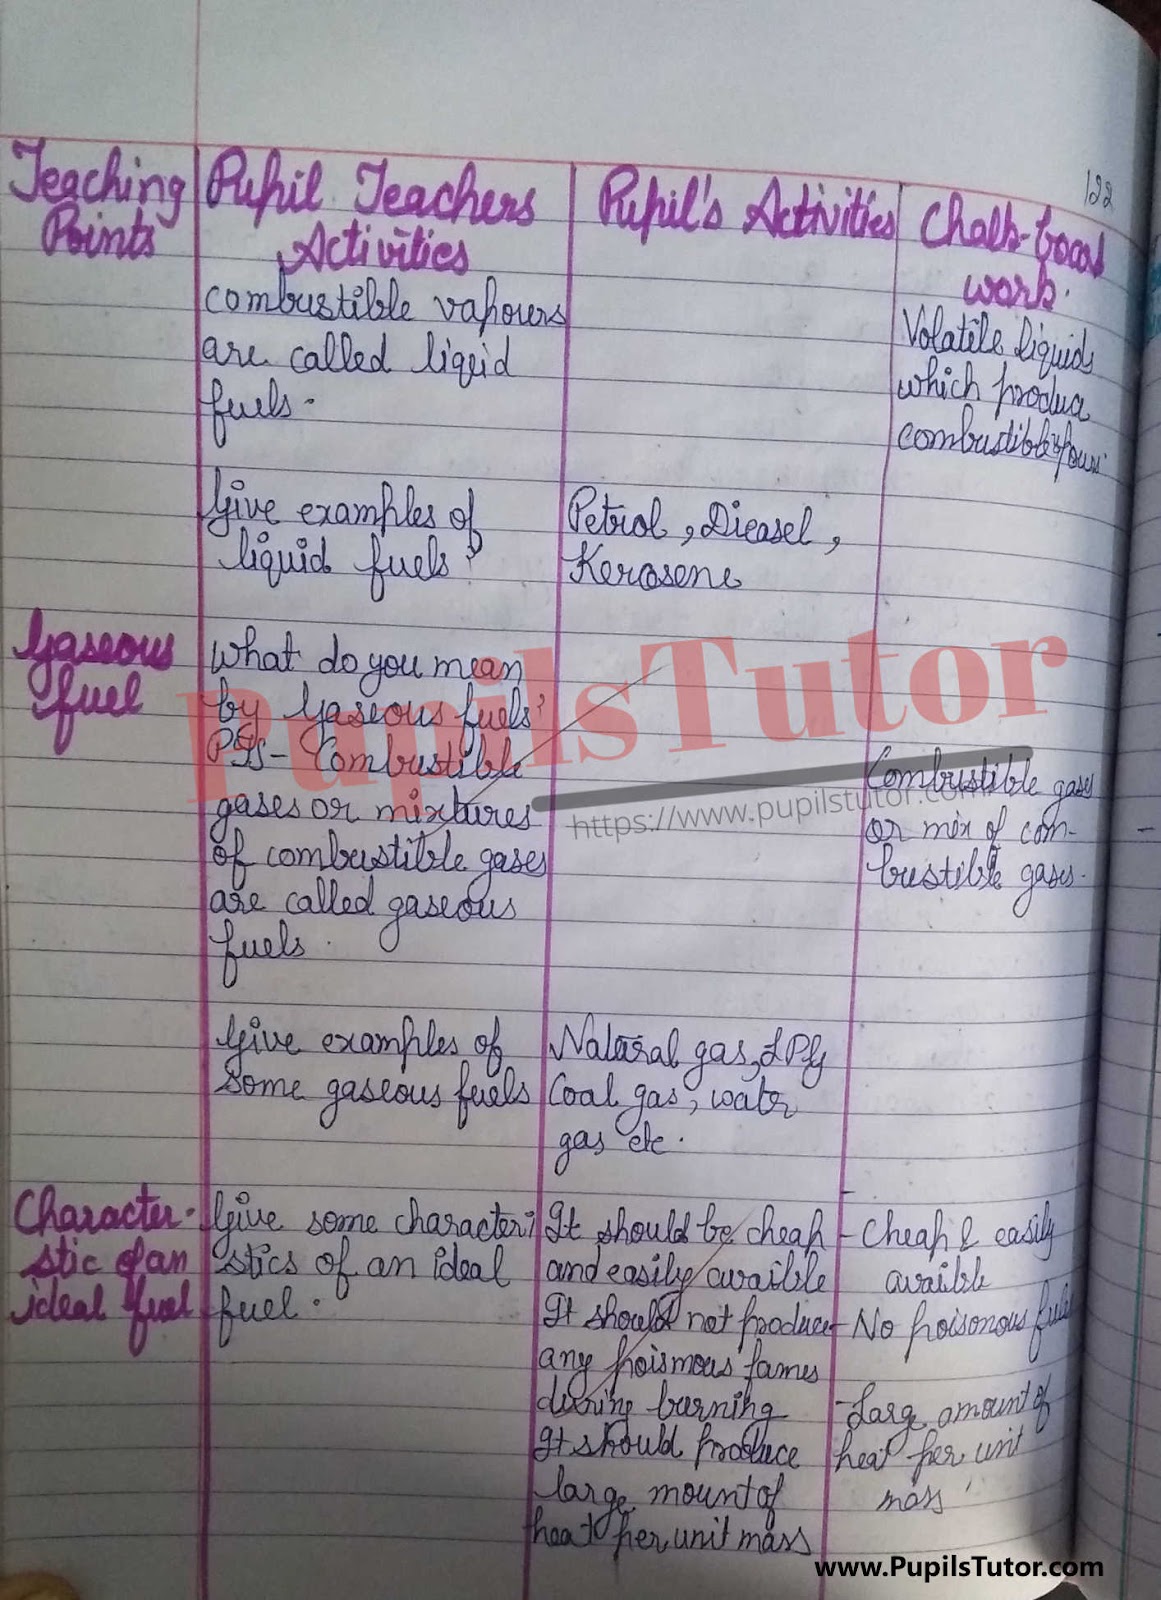 BED, DELED, BTC, BSTC, M.ED, DED And NIOS Teaching Of Physical Science Innovative Digital Lesson Plan Format On Fuel Topic For Class 4th 5th 6th 7th 8th 9th, 10th, 11th, 12th  – [Page And Photo 4] – pupilstutor.com